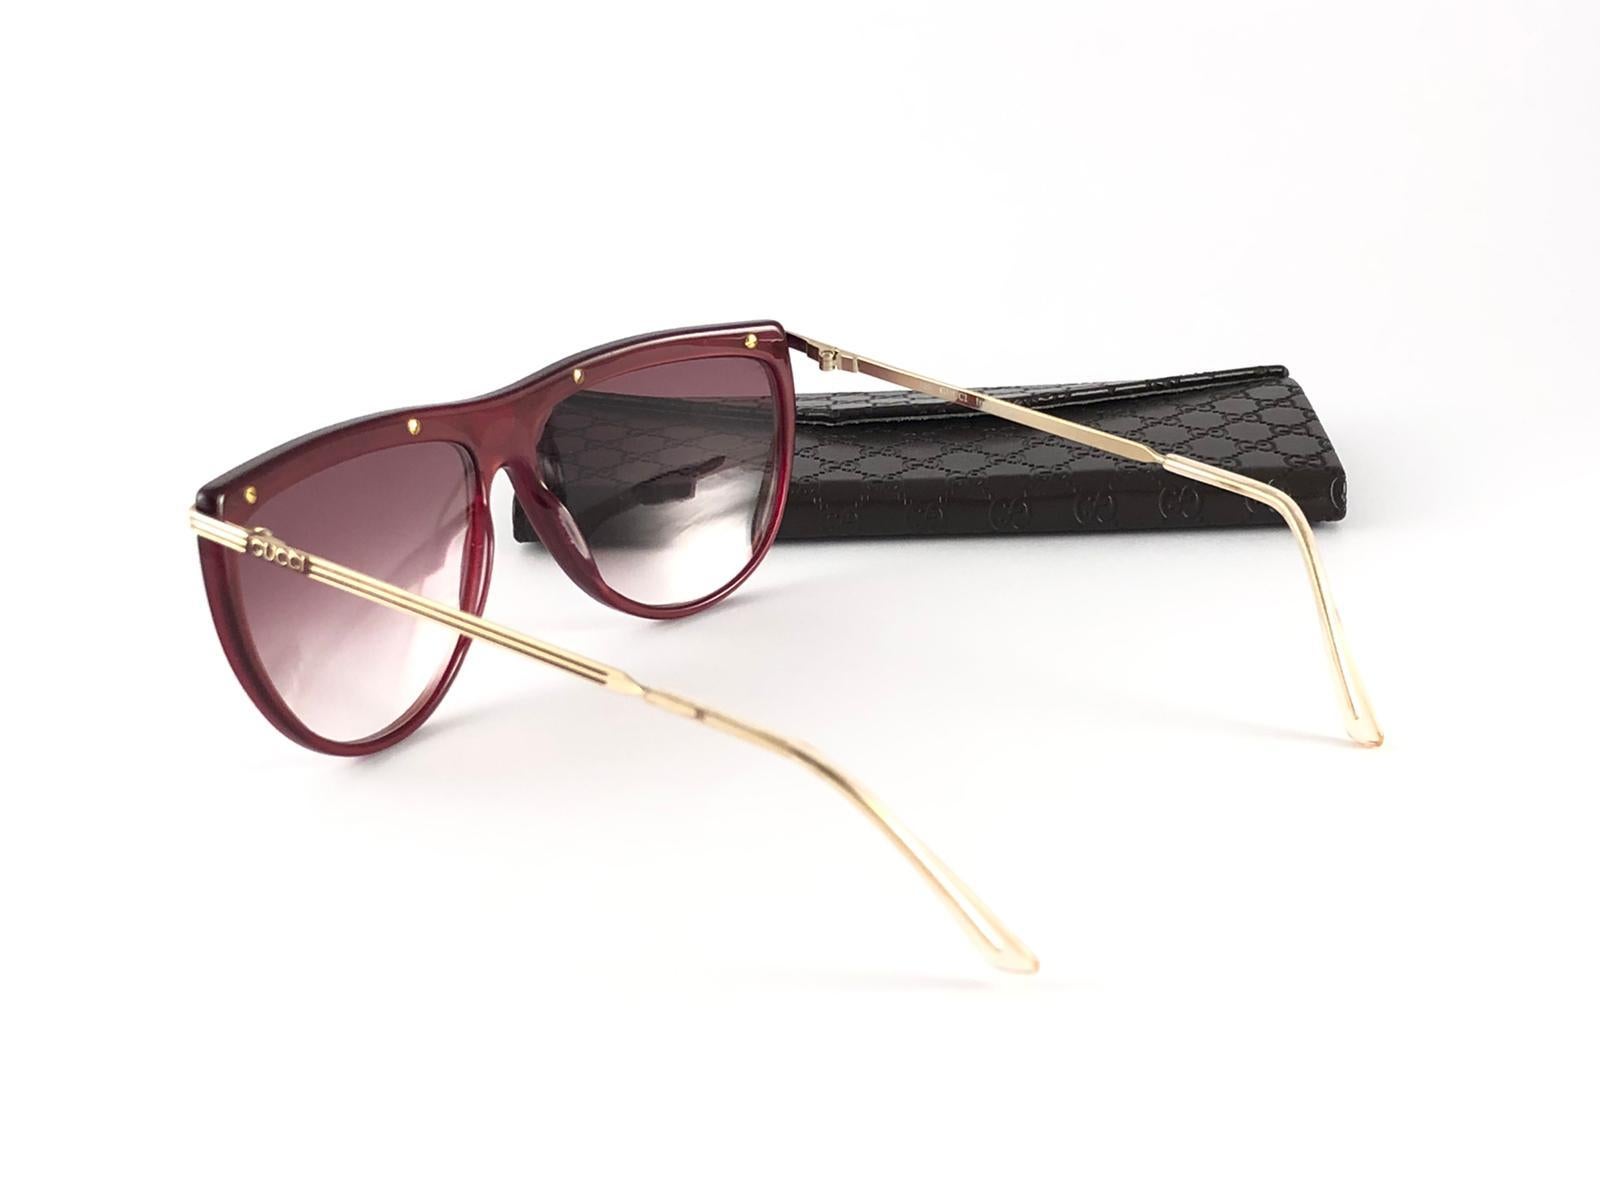 Women's New Vintage Gucci 2303 Burgundy & Gold Accents Sunglasses 1980's Made in Italy